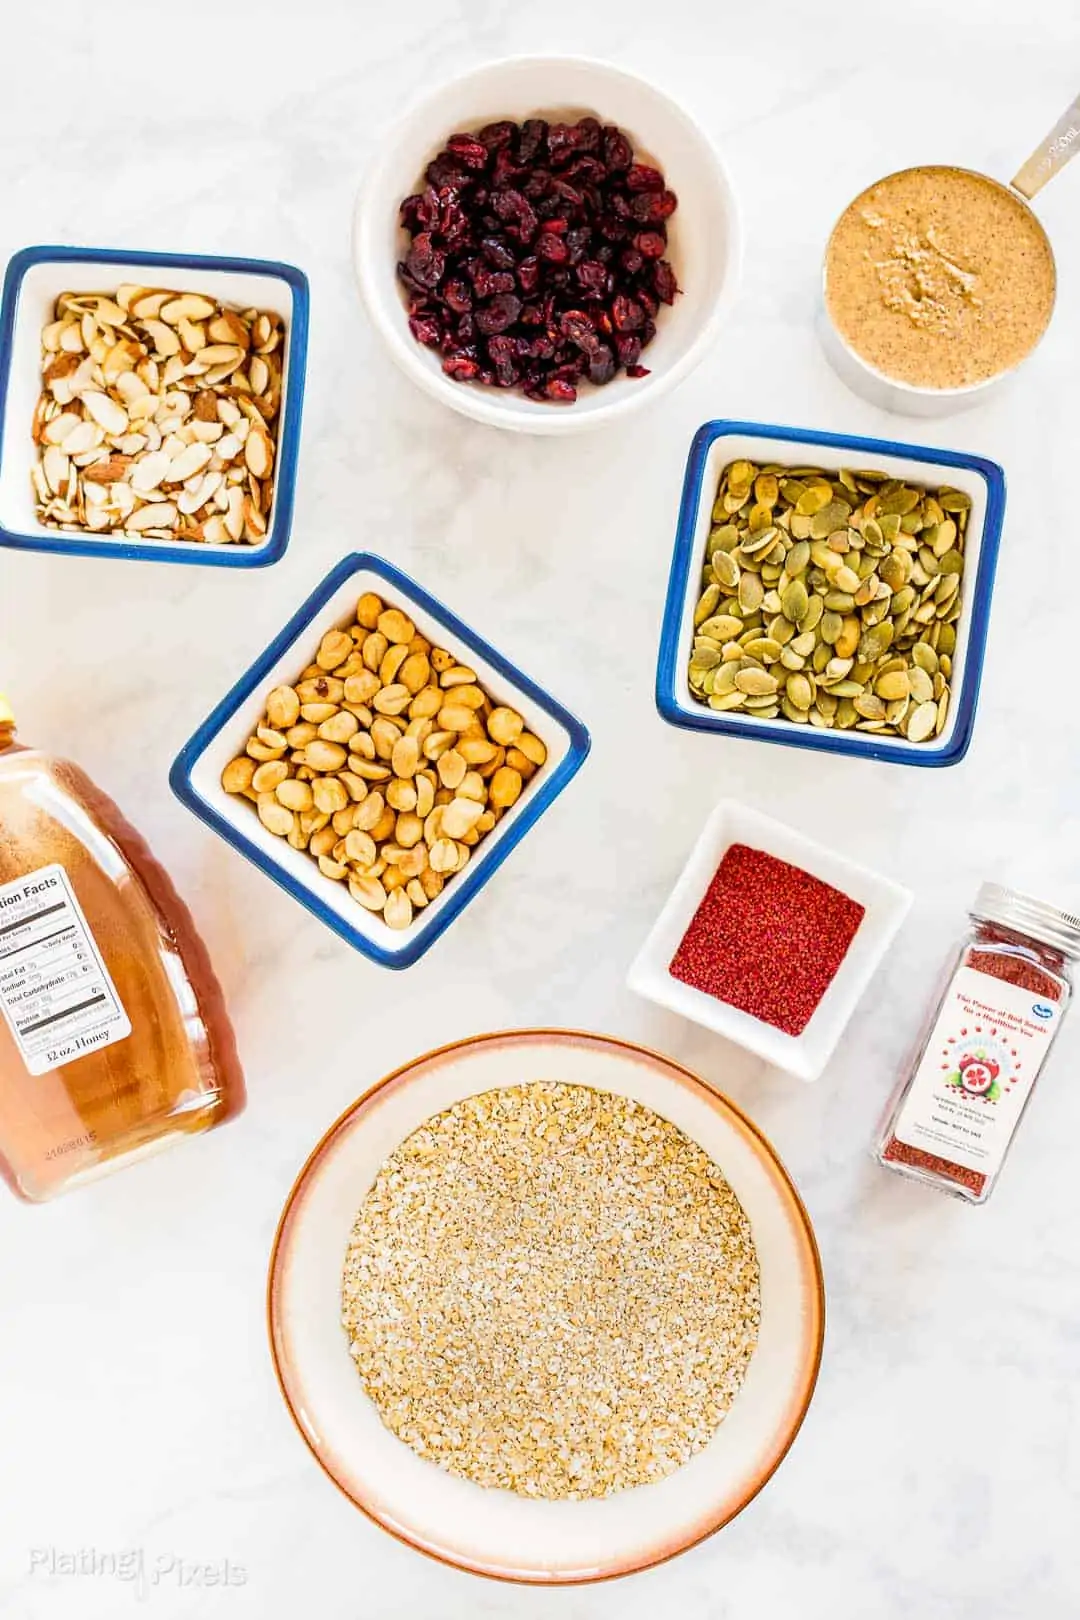 Ingredients for Cranberry Almond Granola Bars prepared on a counter